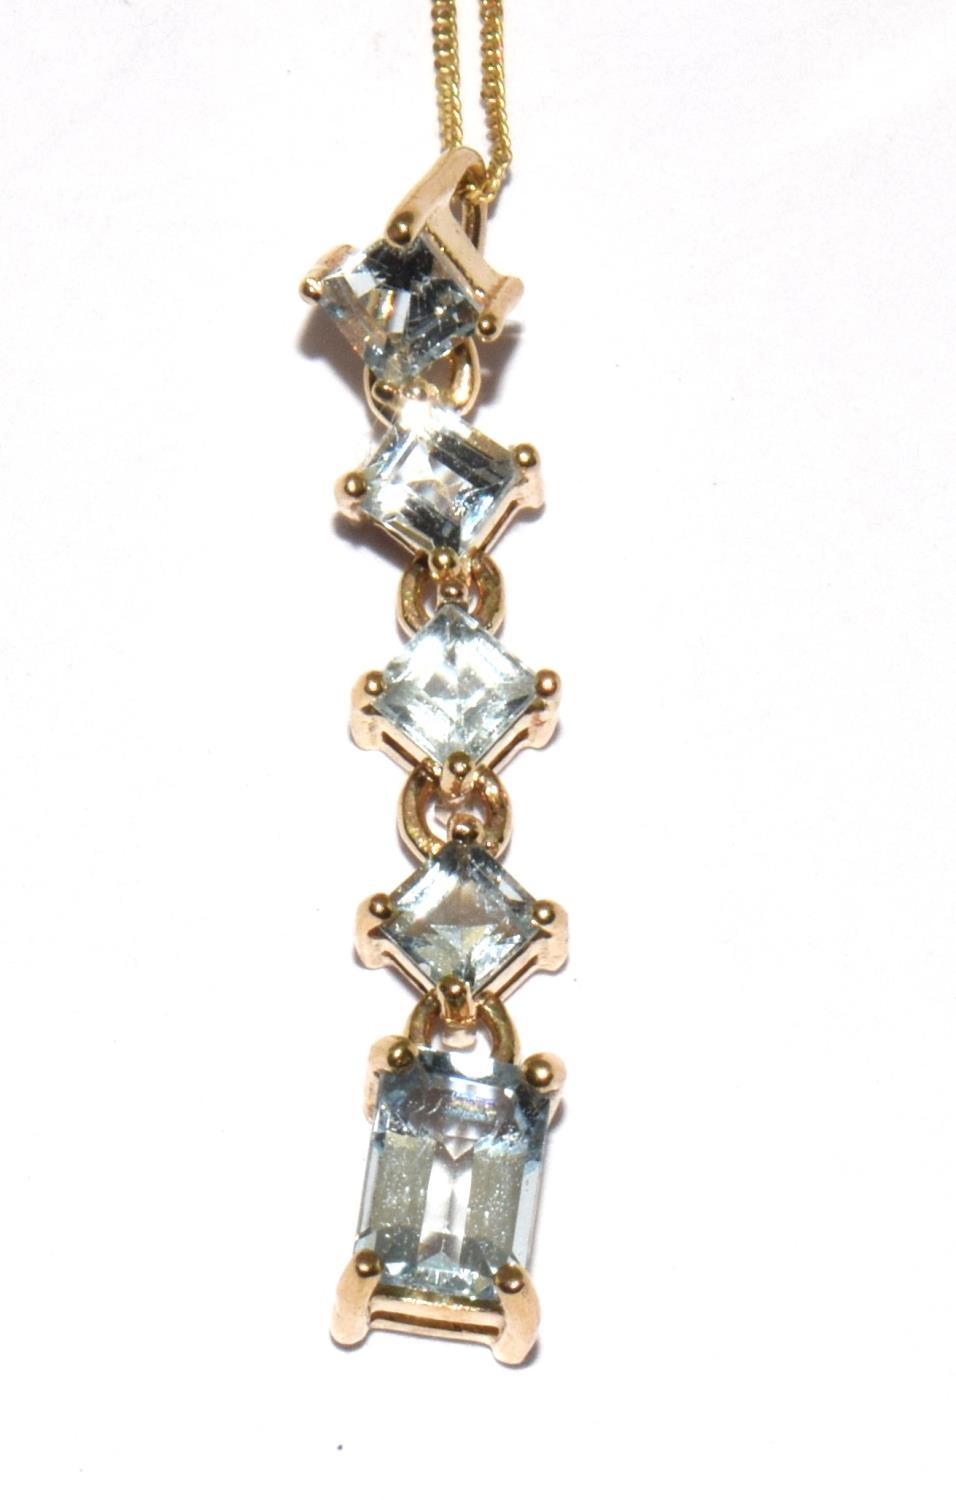 9ct gold 5 stone drop Aquamarine pendant necklace with chain 40cm - Image 2 of 7